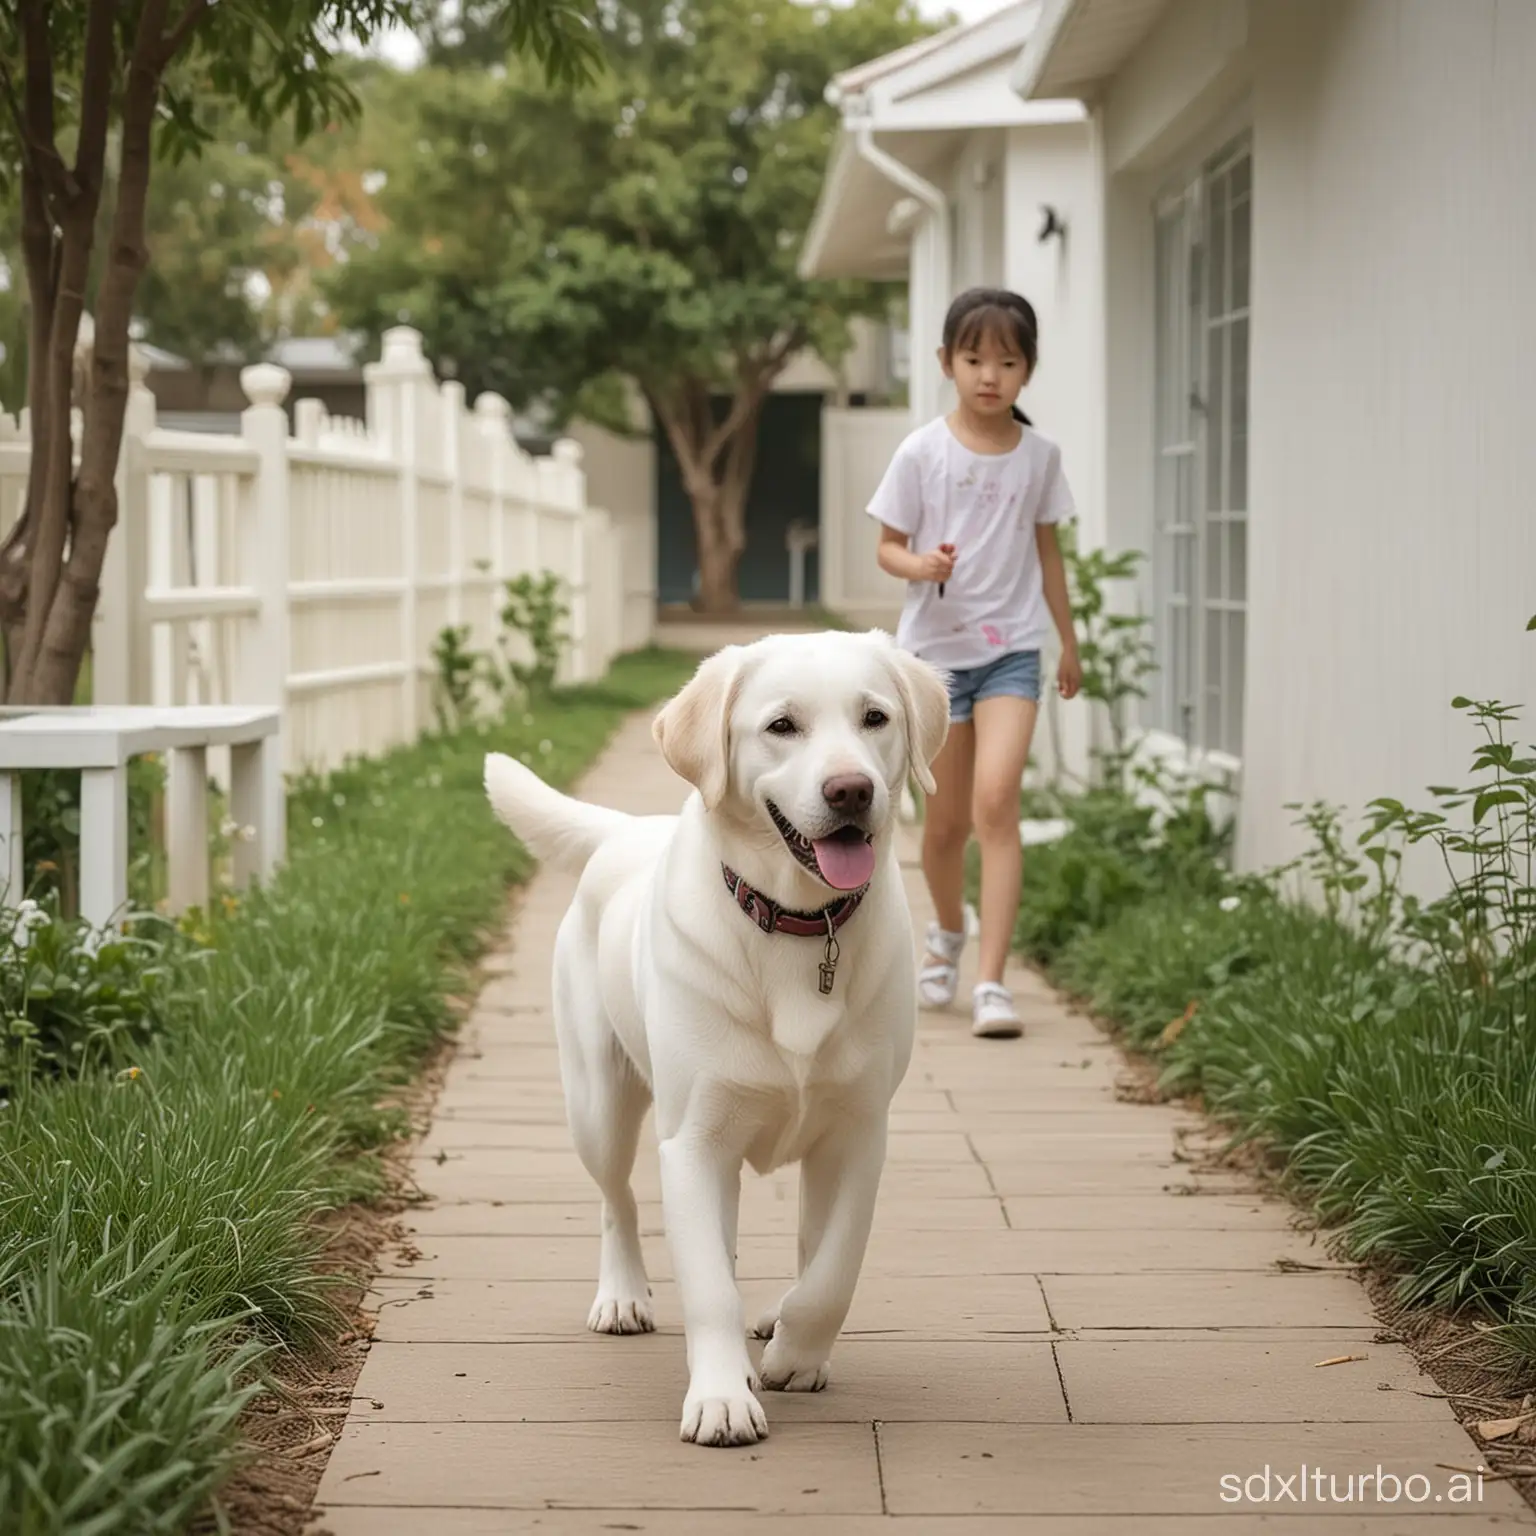 The Chinese little girl walking in the yard with a white Labrador retriever